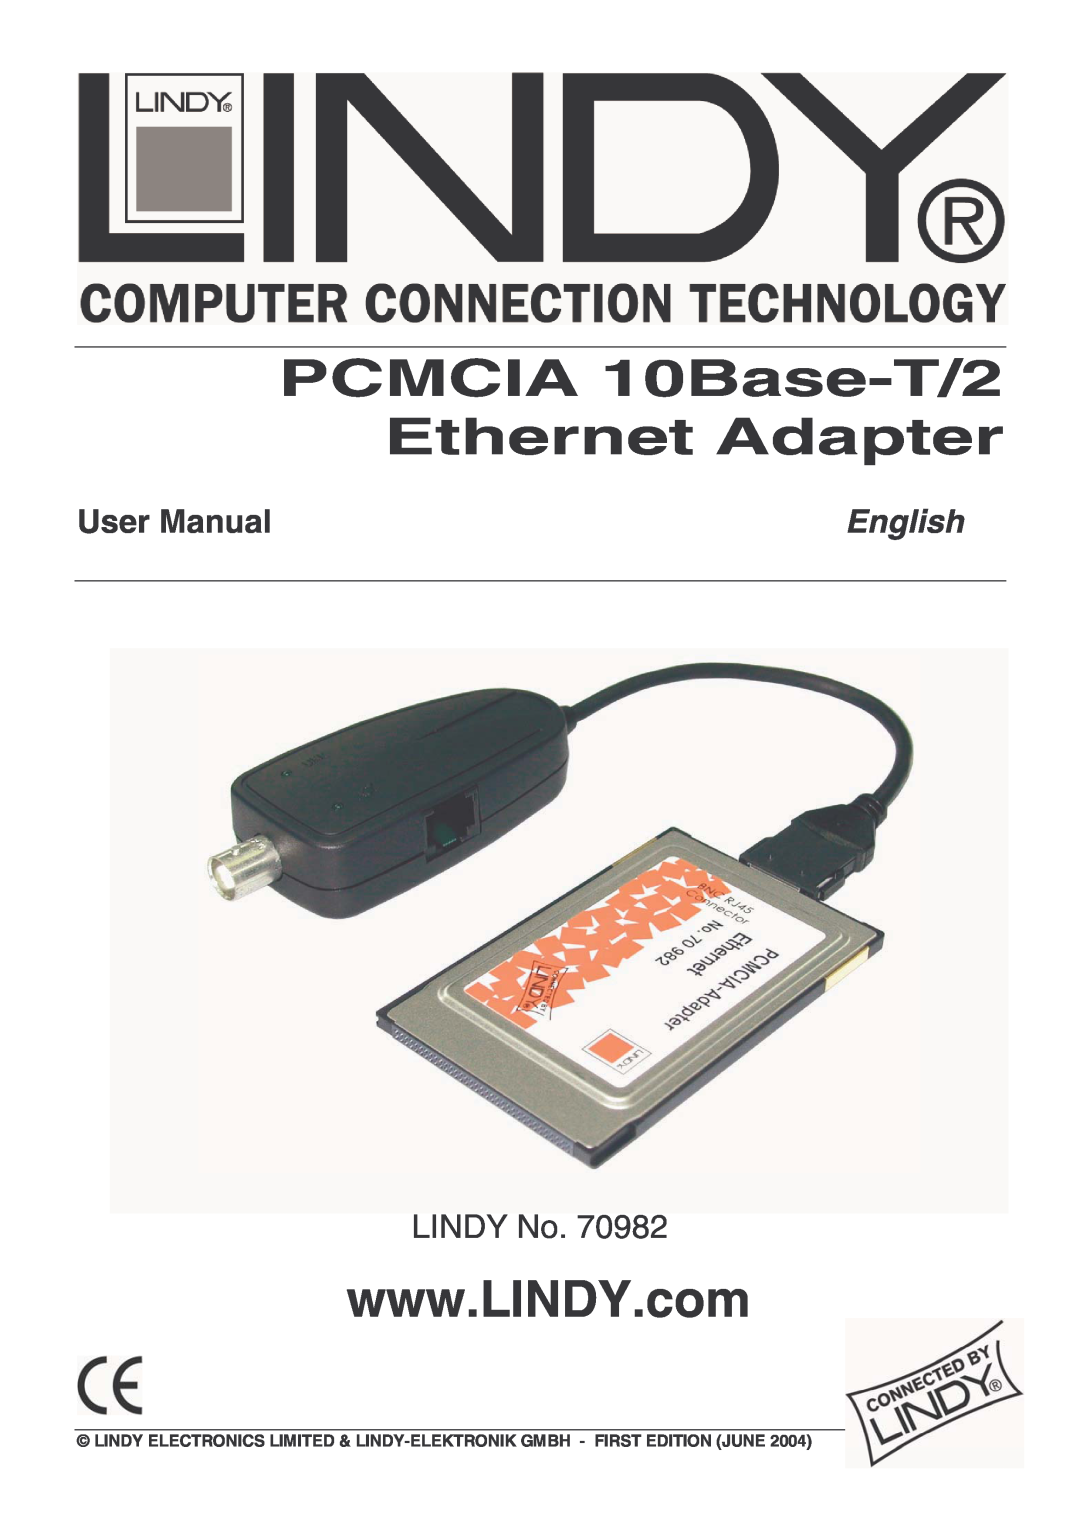 Lindy 70928 user manual English, PCMCIA 10Base-T/2 Ethernet Adapter, LINDY No 